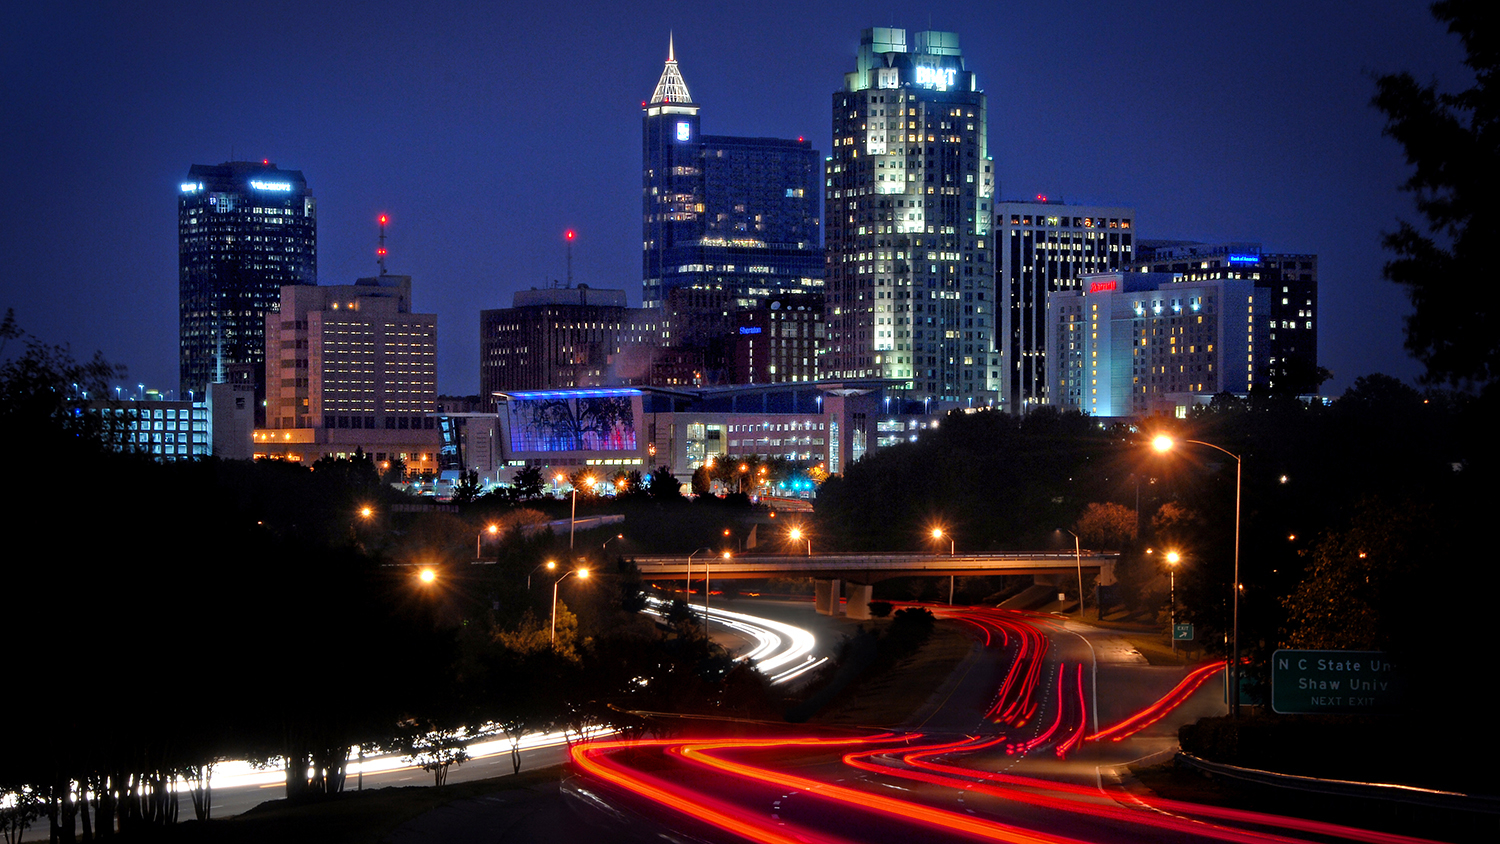 City of Raleigh skyline in the early evening.